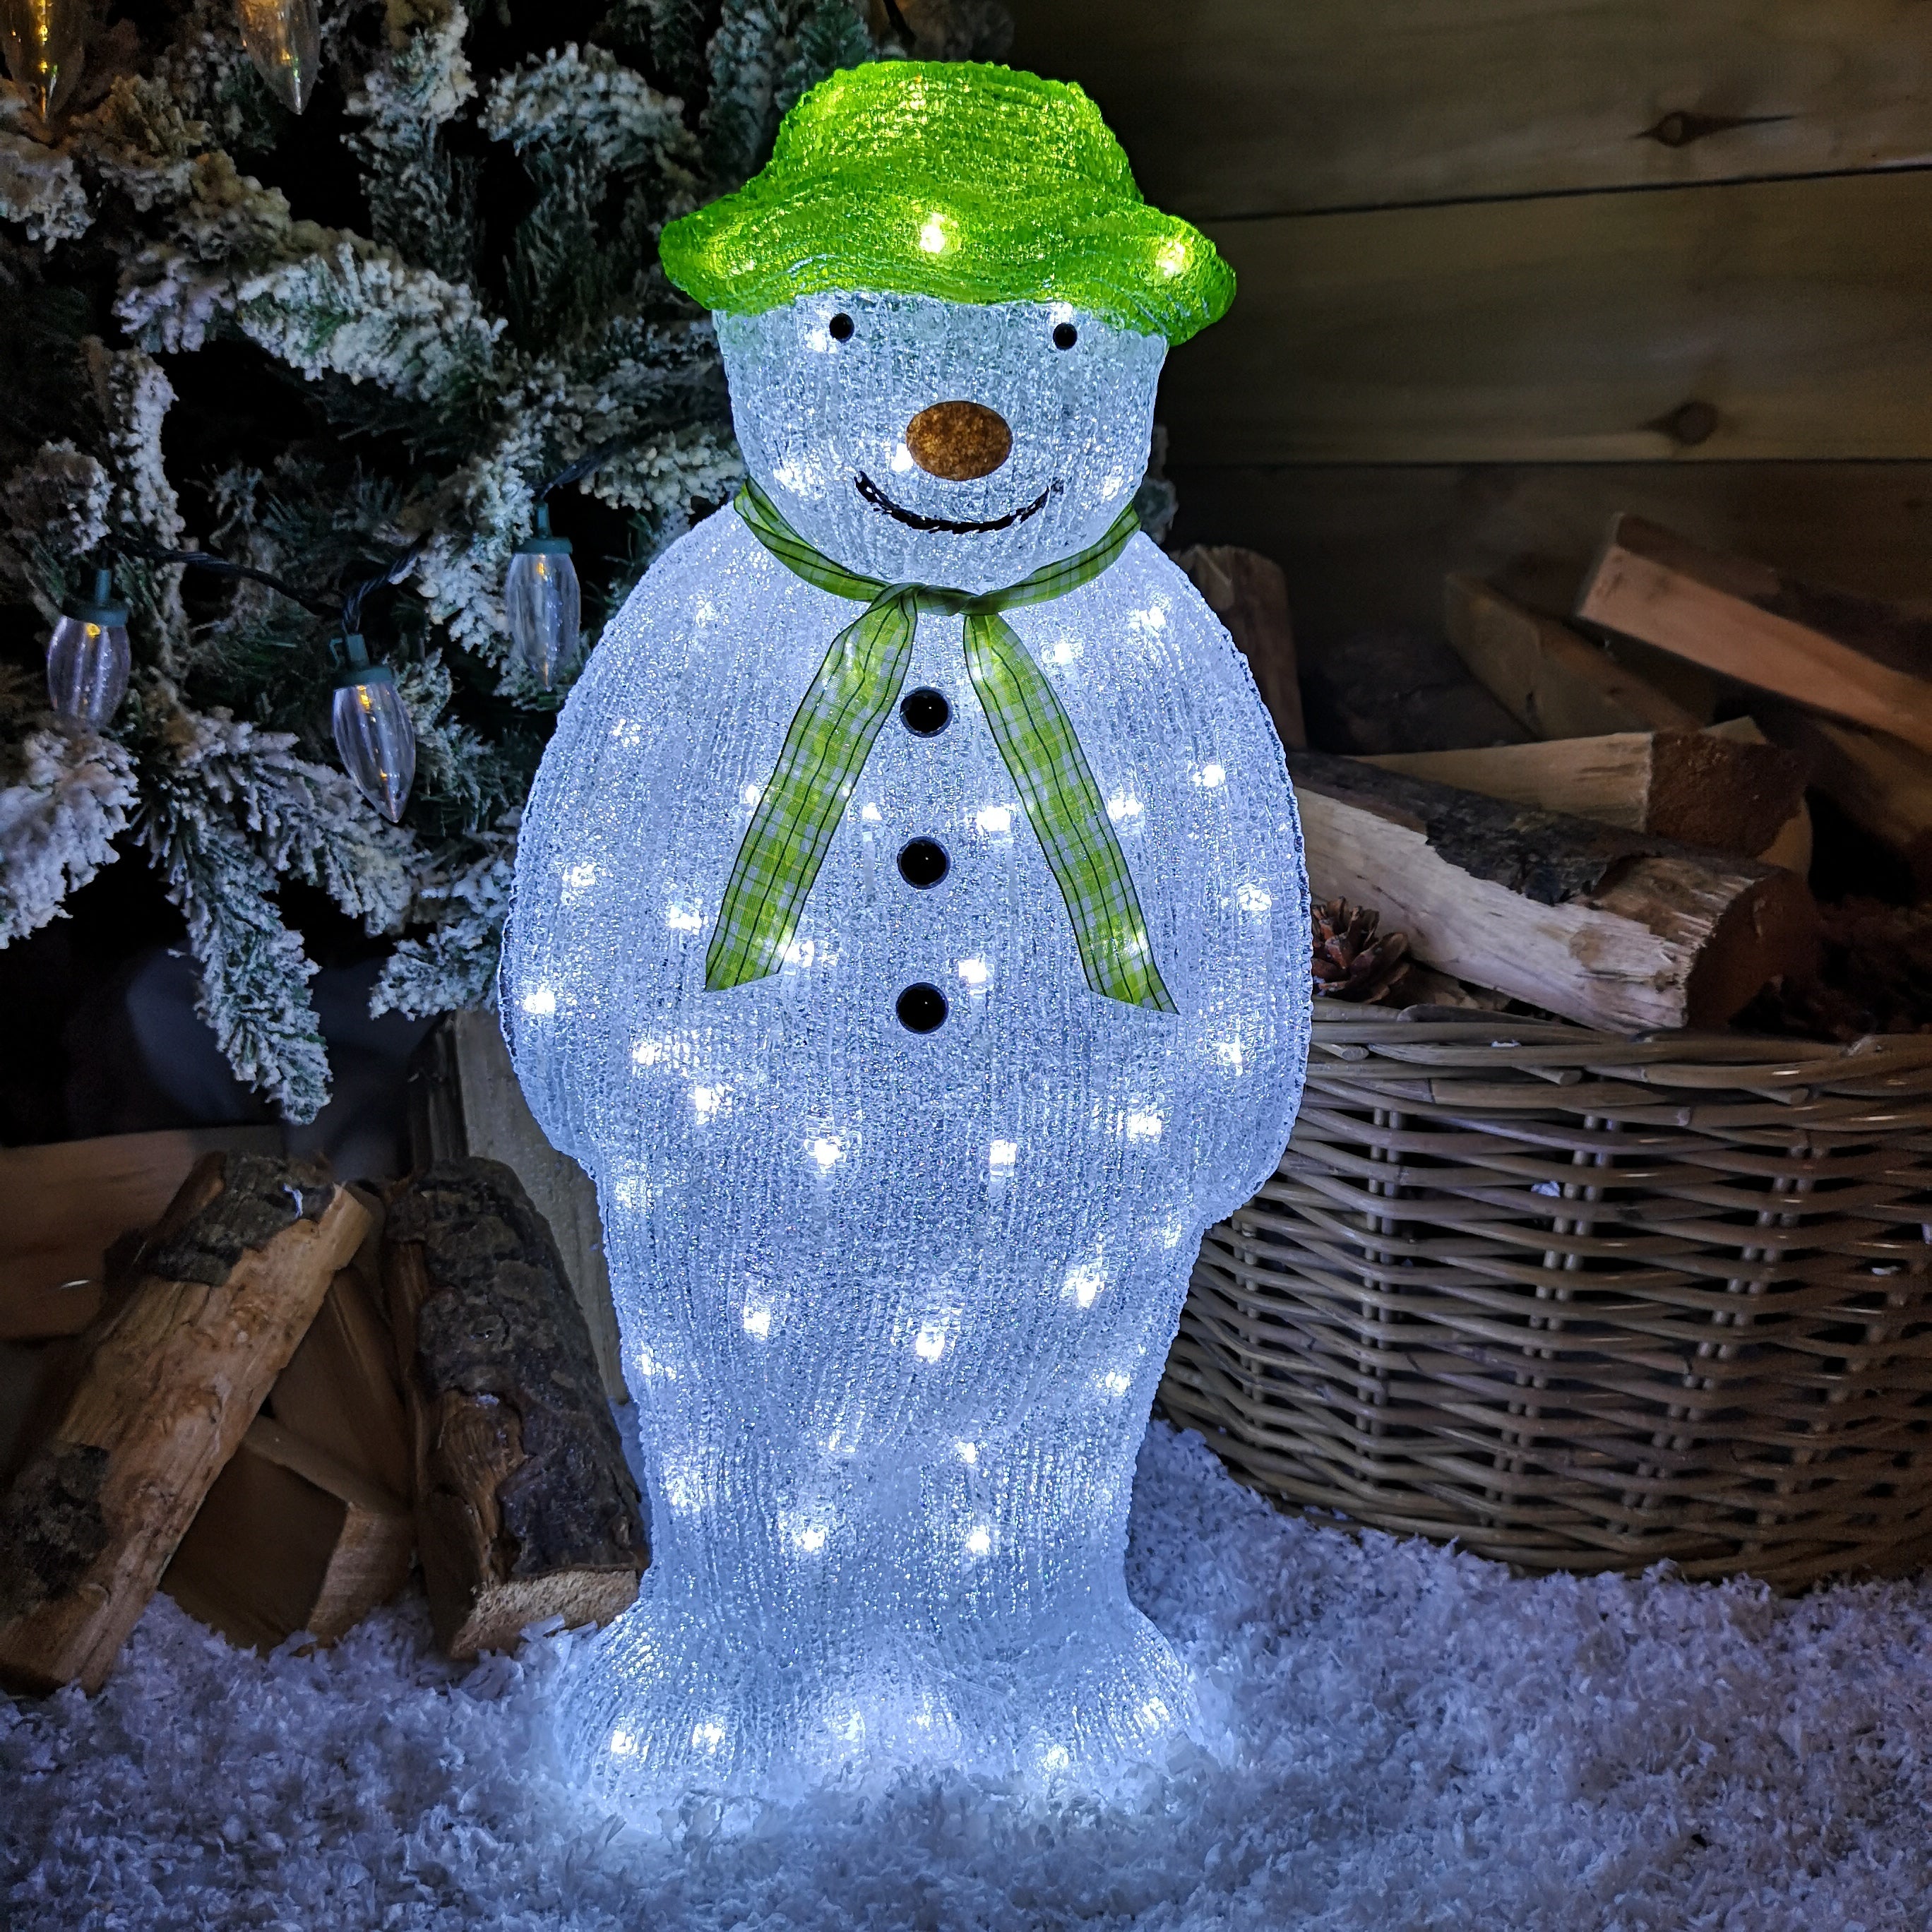 The Snowman and Friends Acrylic LED Lit Outdoor Figures – Cheaper Online